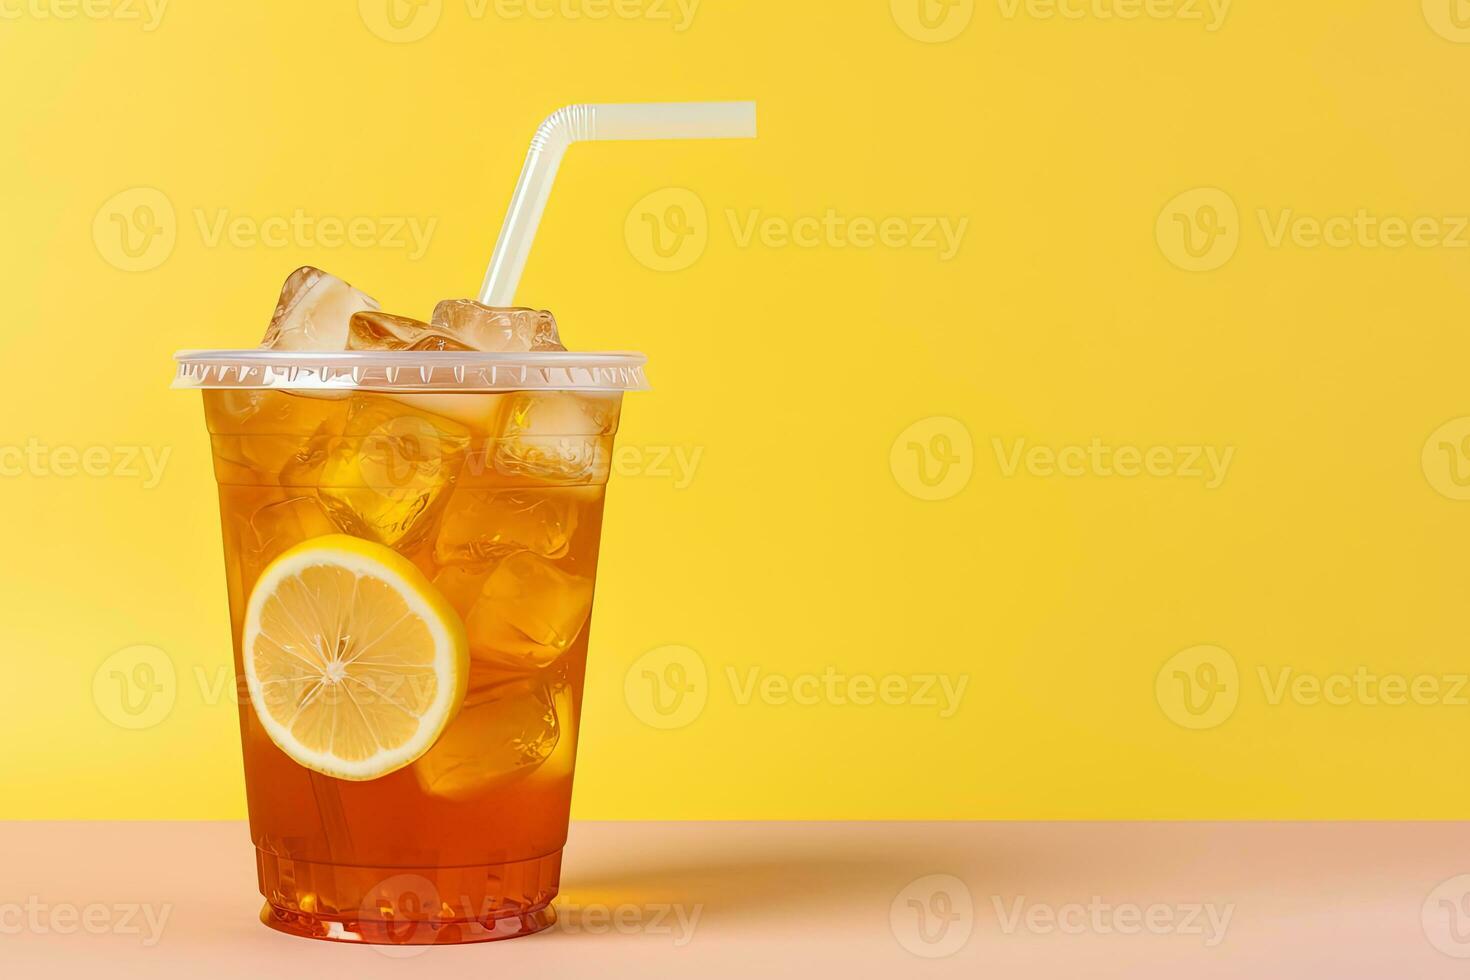 https://static.vecteezy.com/system/resources/previews/027/471/318/non_2x/iced-lemon-tea-on-plastic-takeaway-glass-ai-generated-photo.jpg